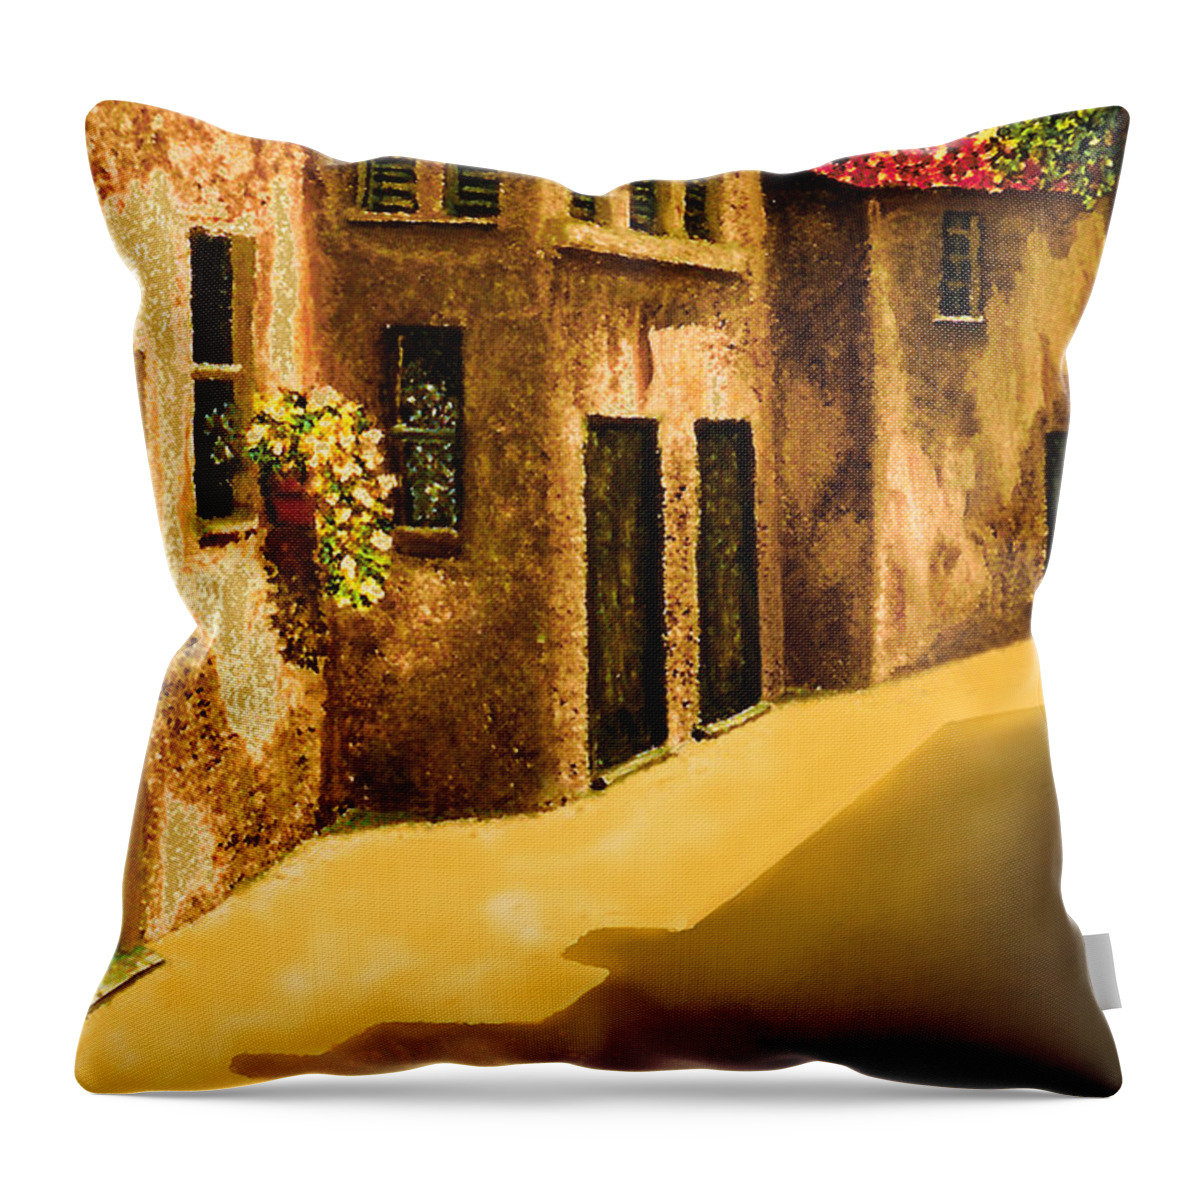 Oil Painting Throw Pillow featuring the painting Narrow Street by CHAZ Daugherty